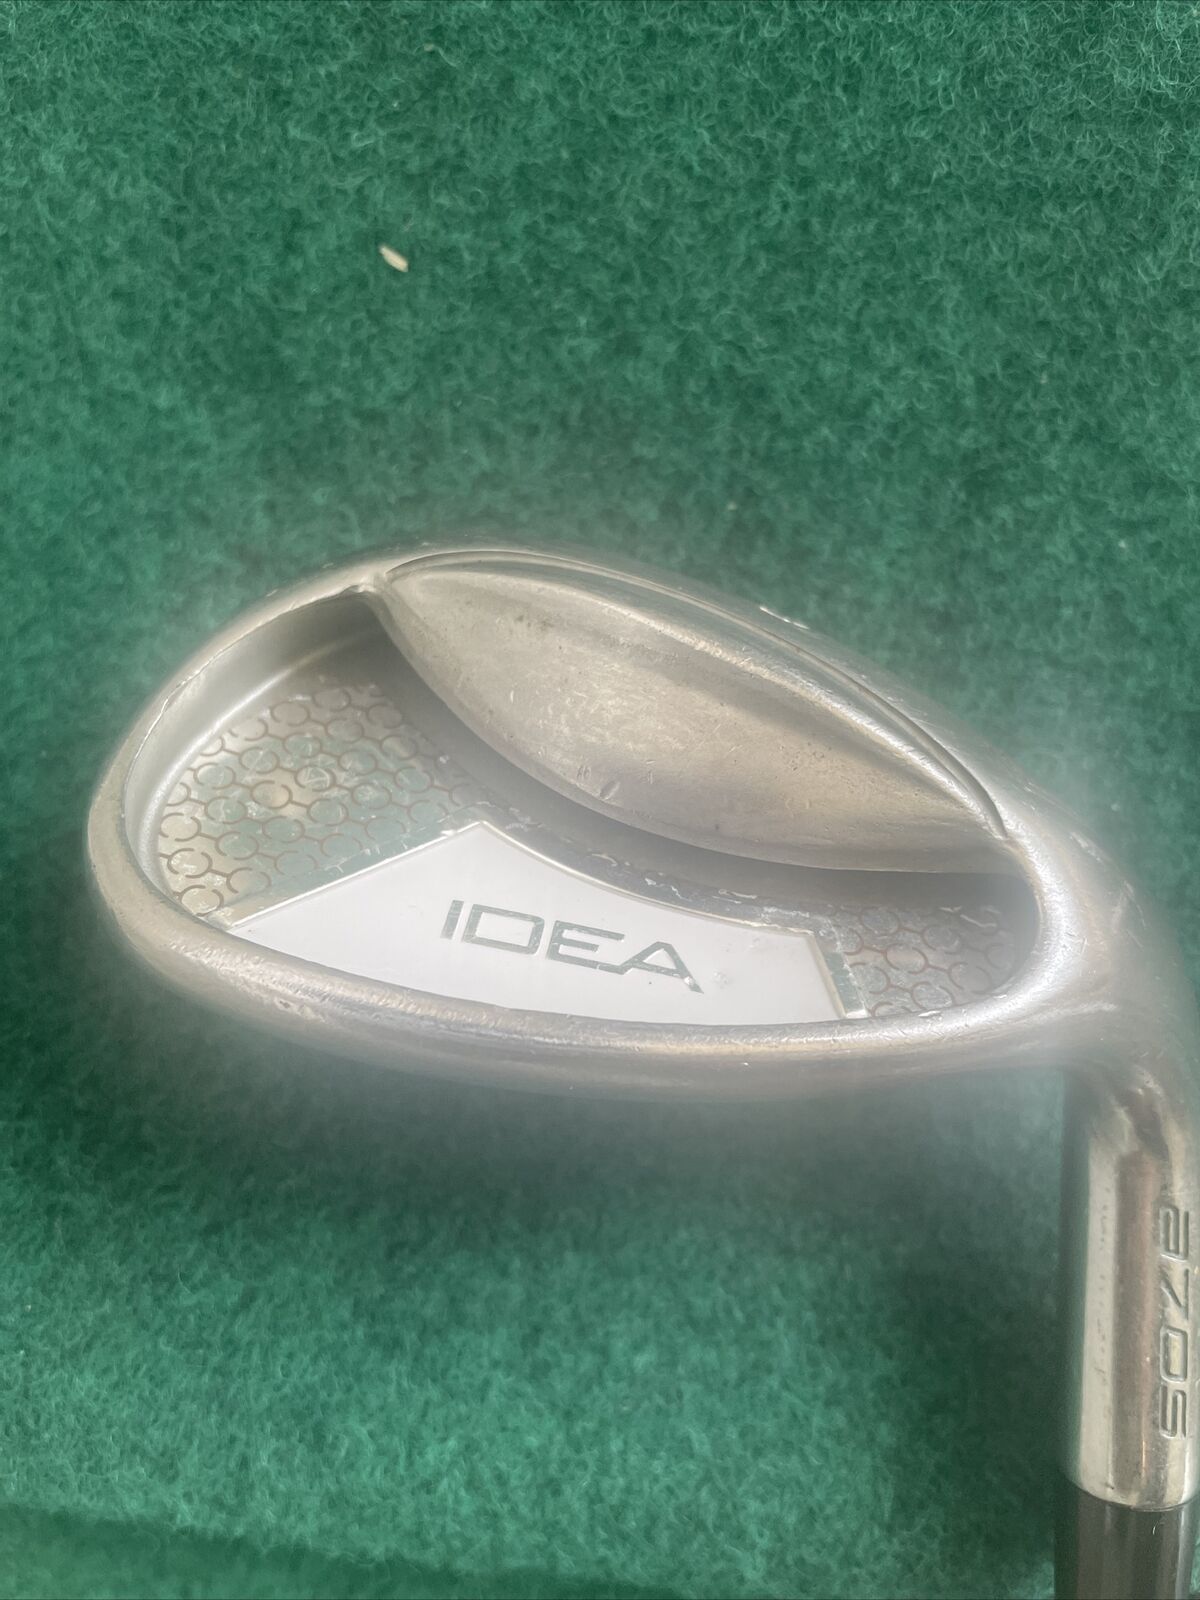 Adams Golf IDEA A70S Sand Wedge Ladies Right Handed Graphite 34.5in